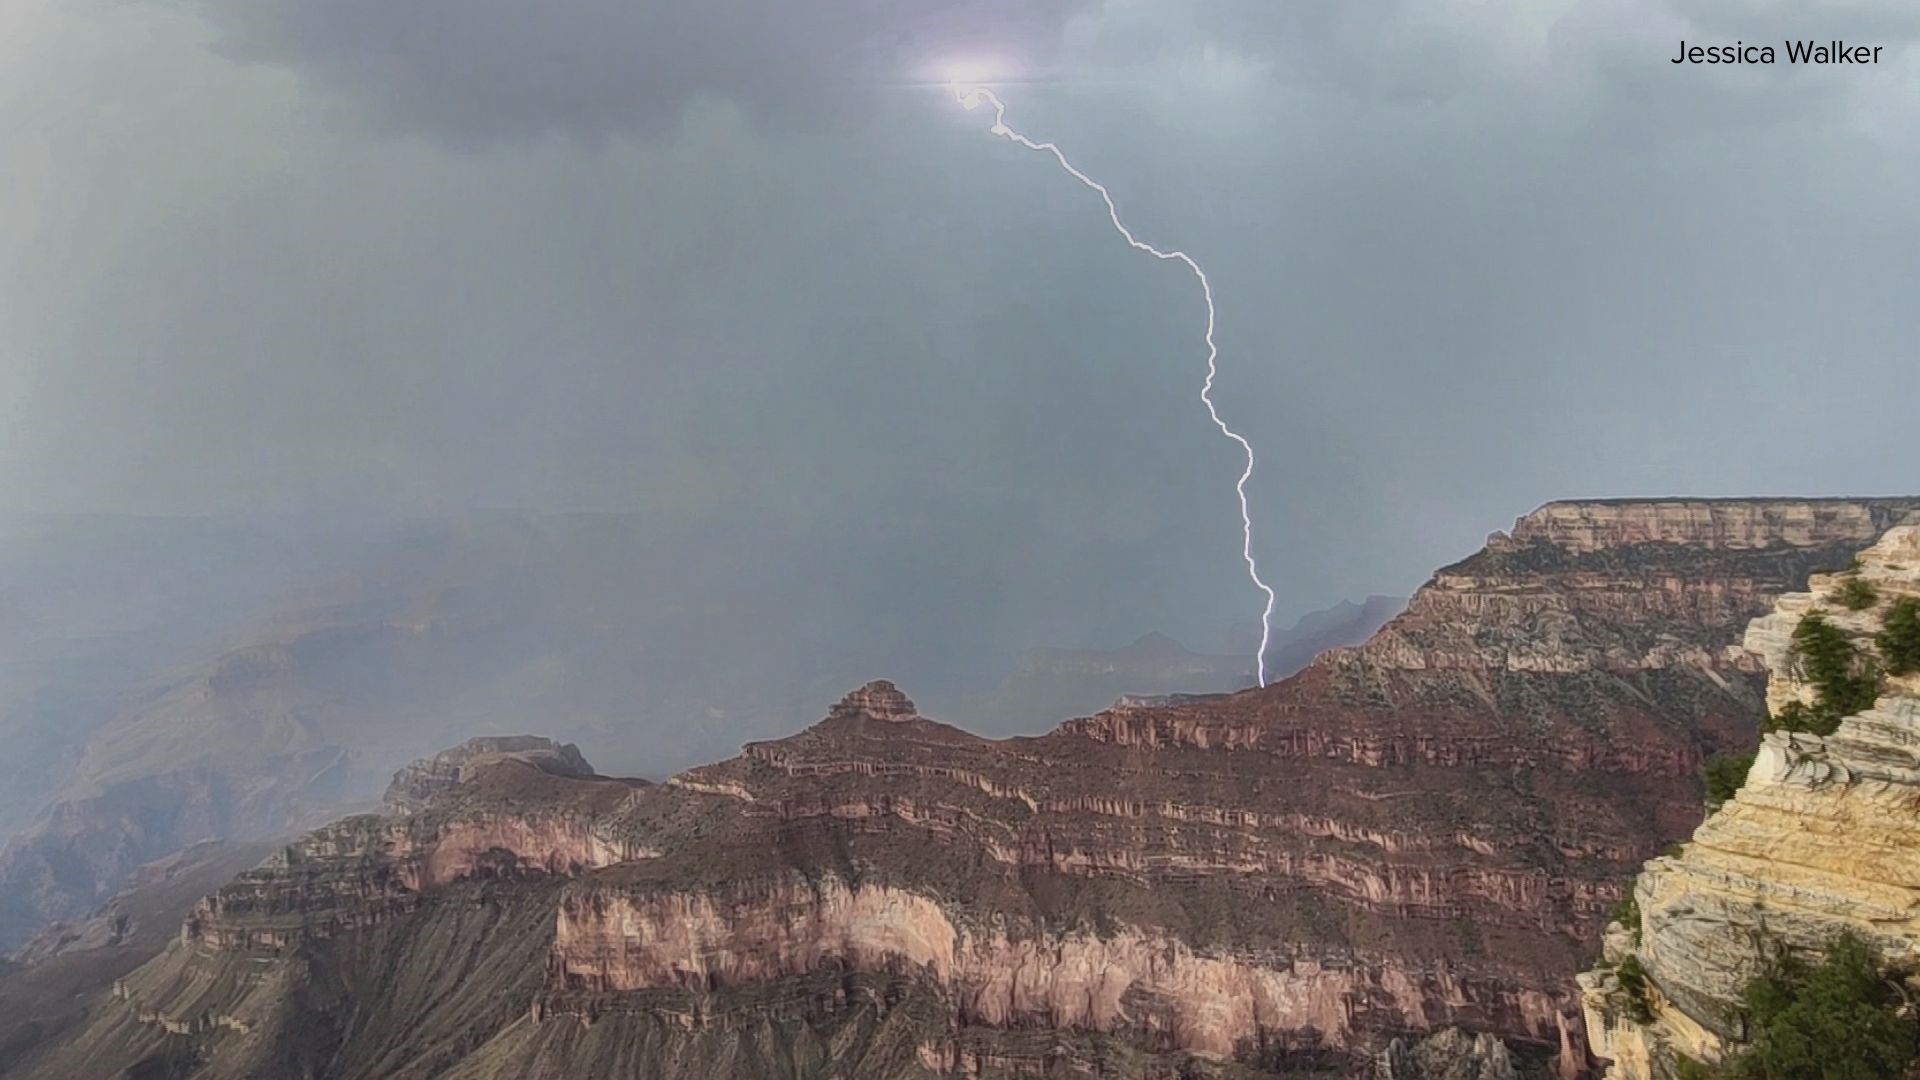 Grand Canyon officials urge visitors to avoid outdoor activities during storms after hikers were recently struck by lightning. Jen Wahl has the story.